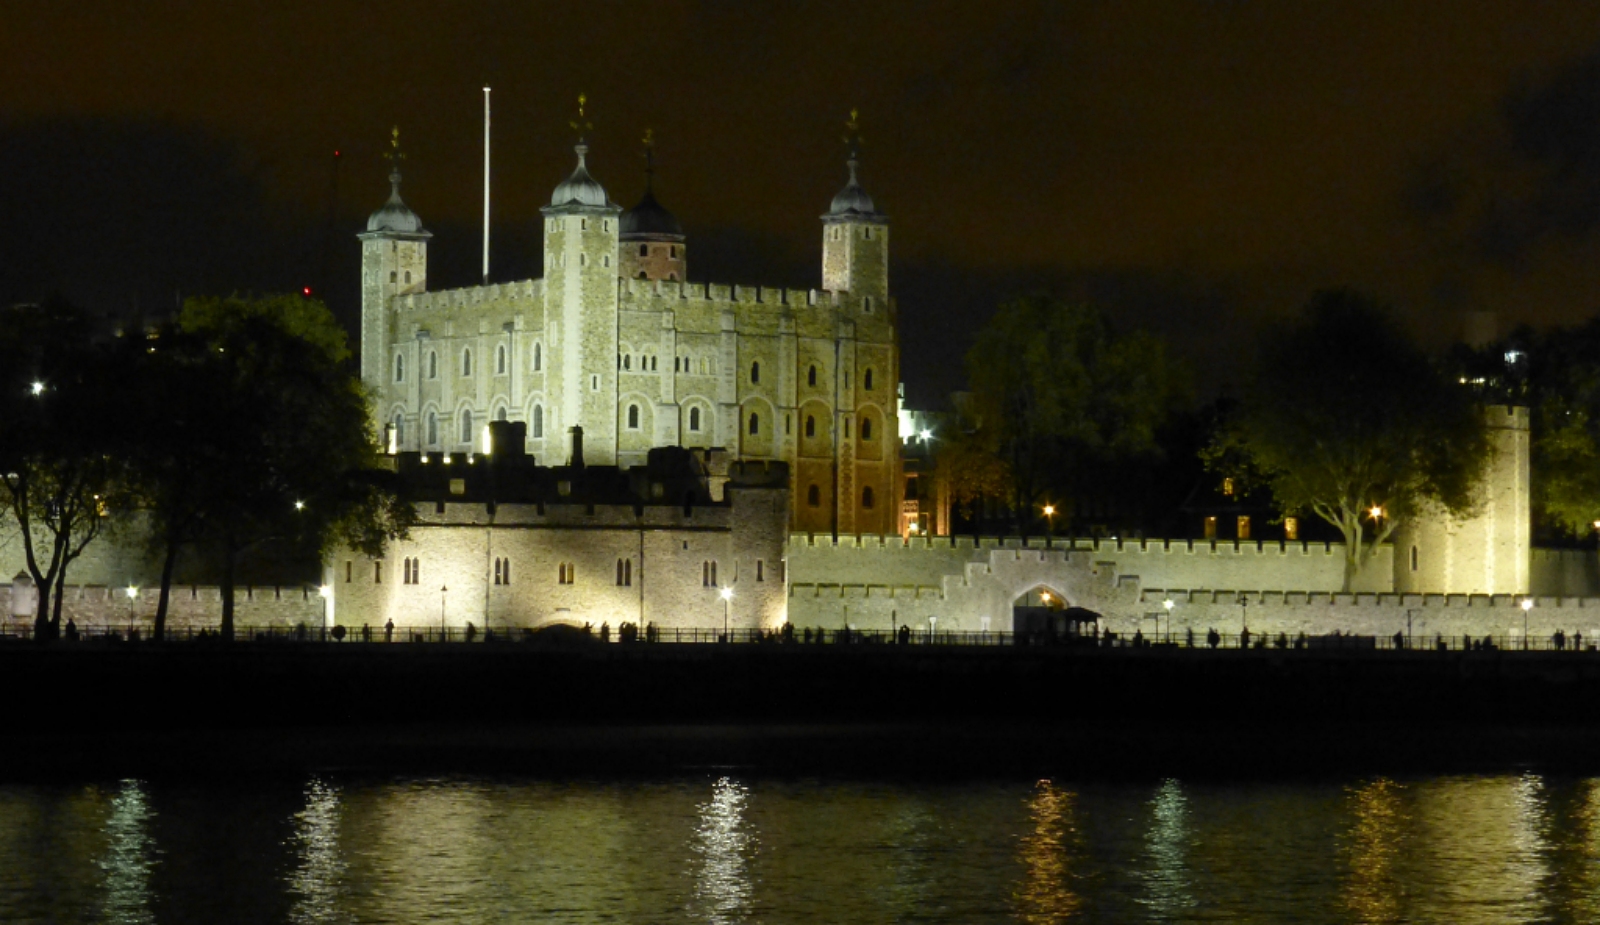 The Tower of London at Night